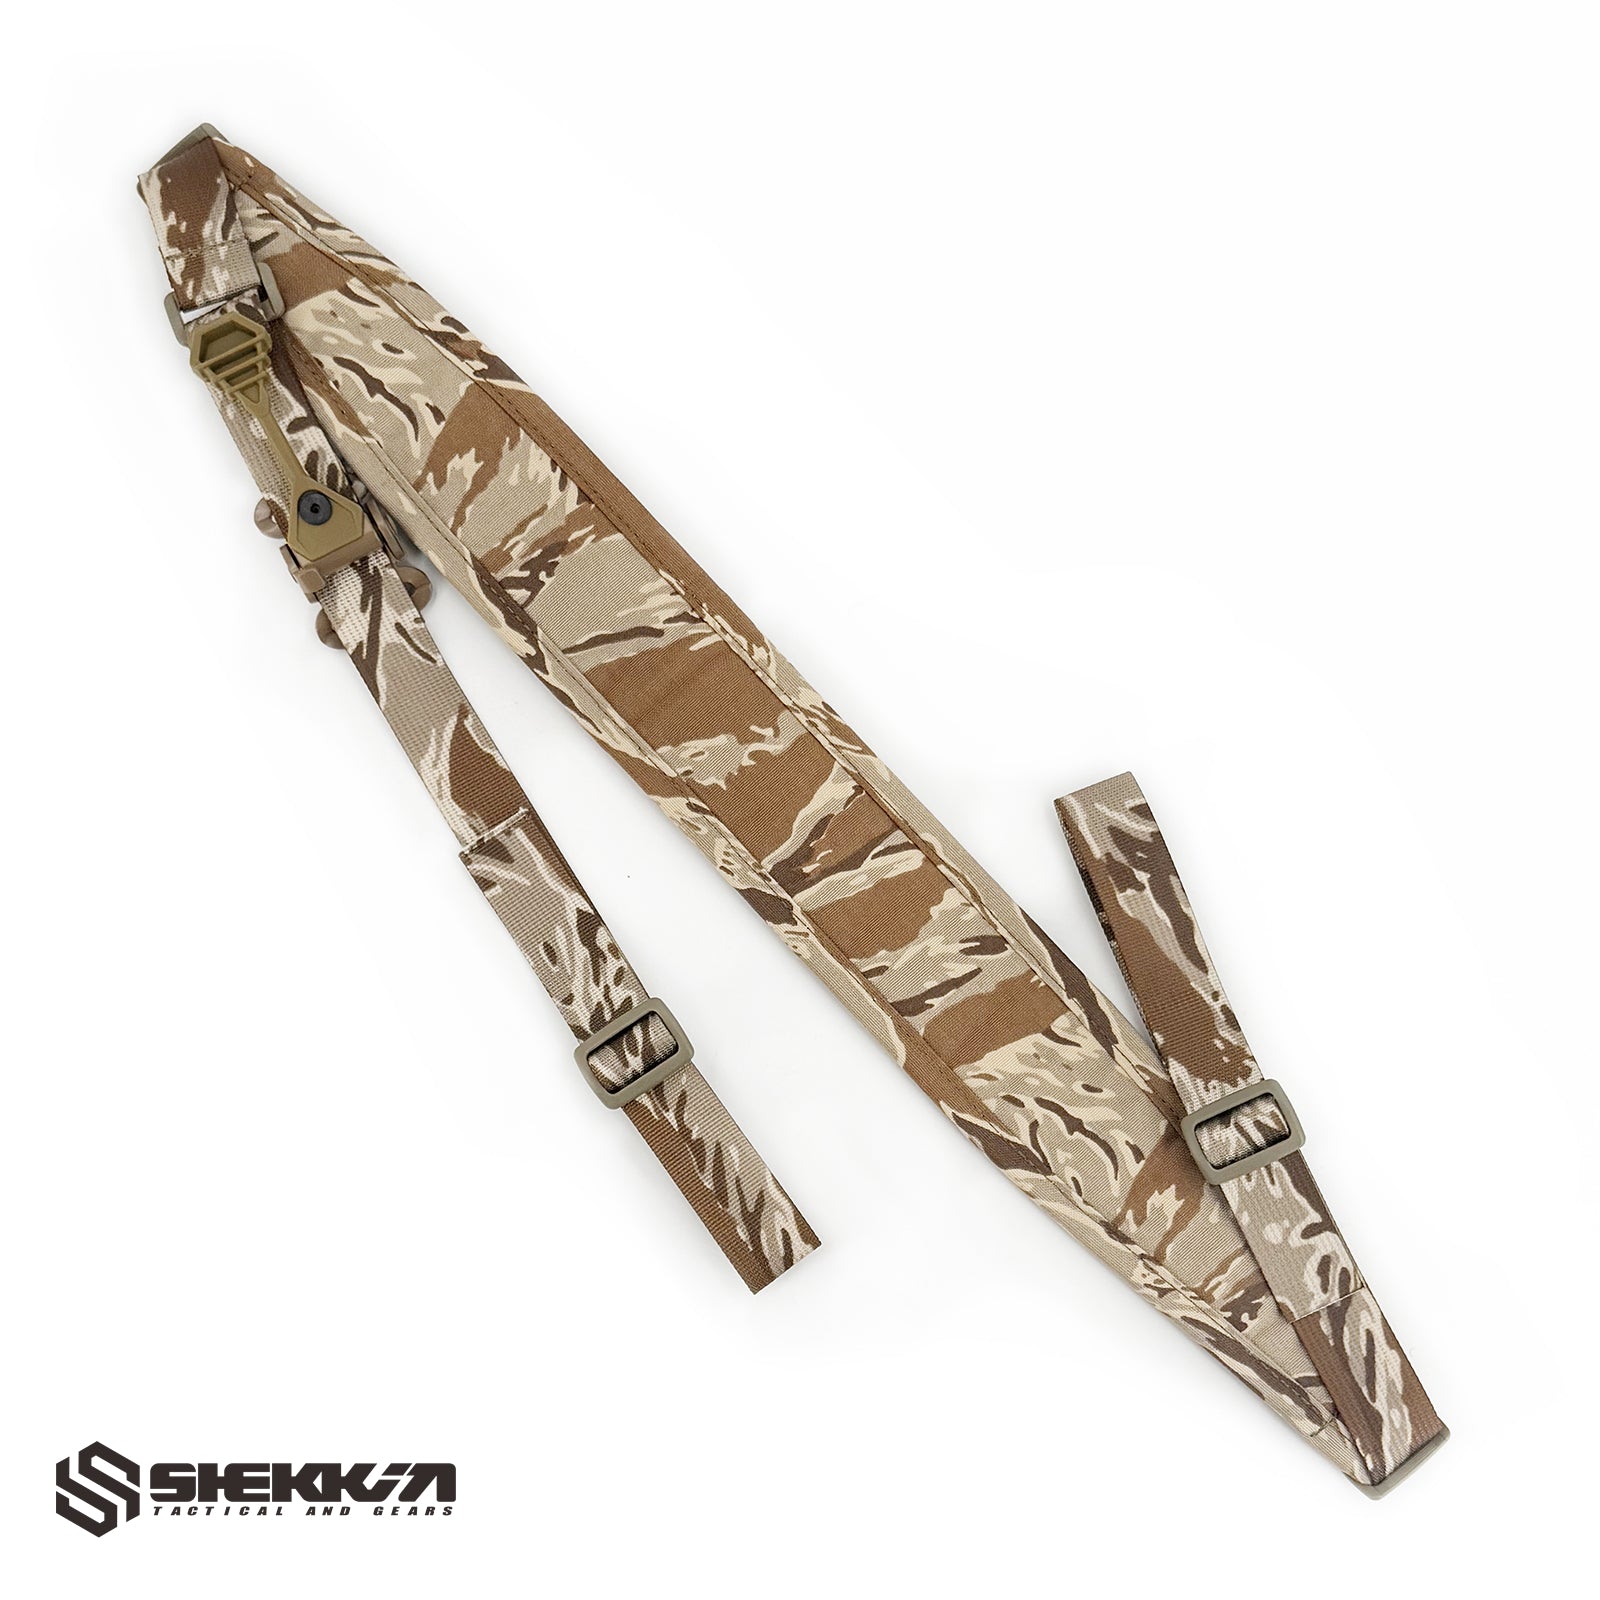 Slingster style two point tactical sling